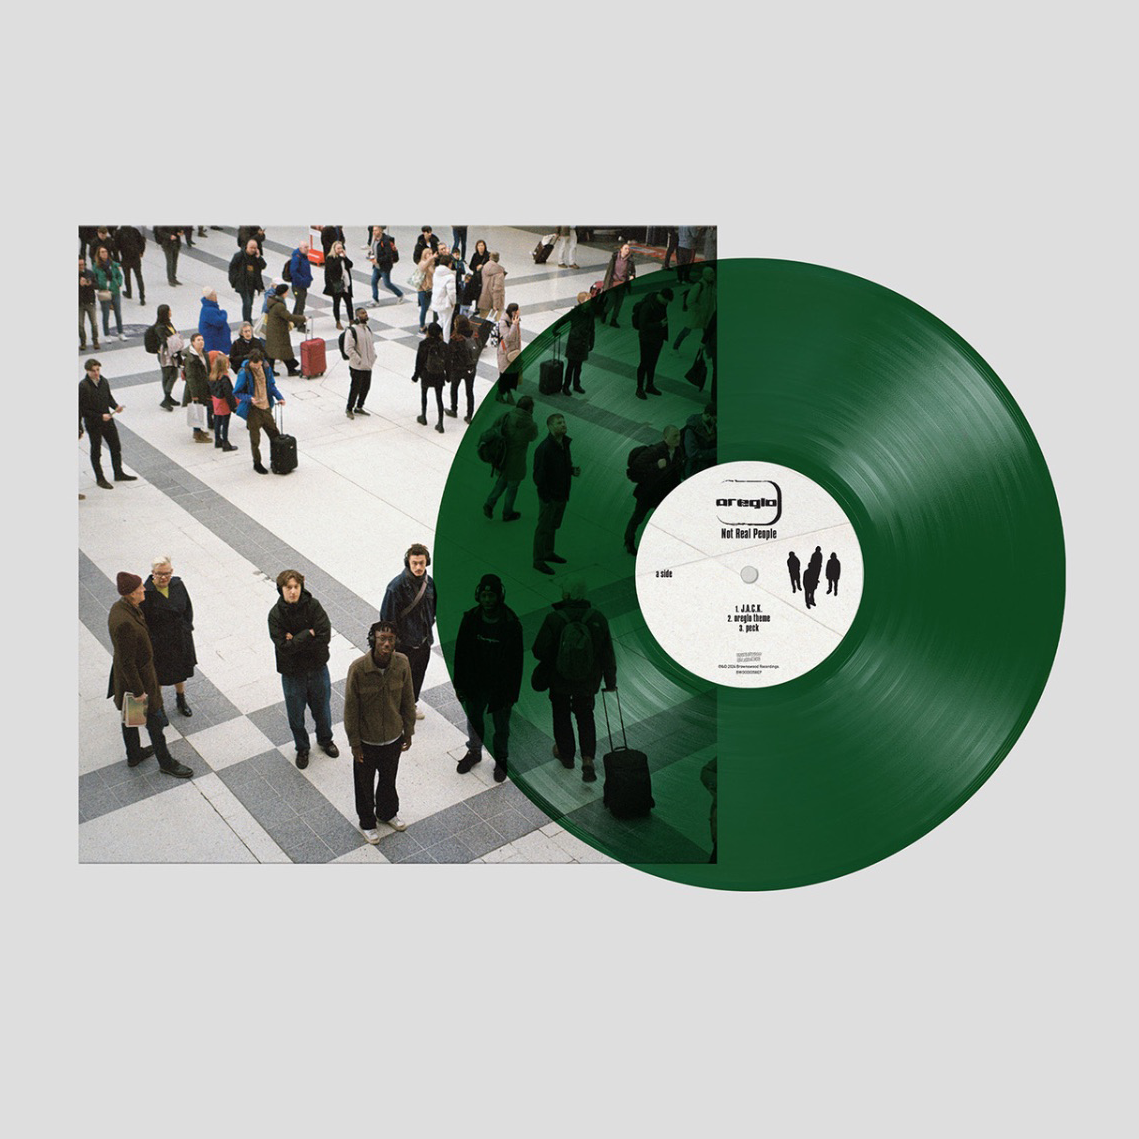 oreglo - Not Real People: Transparent Green Vinyl 12" EP